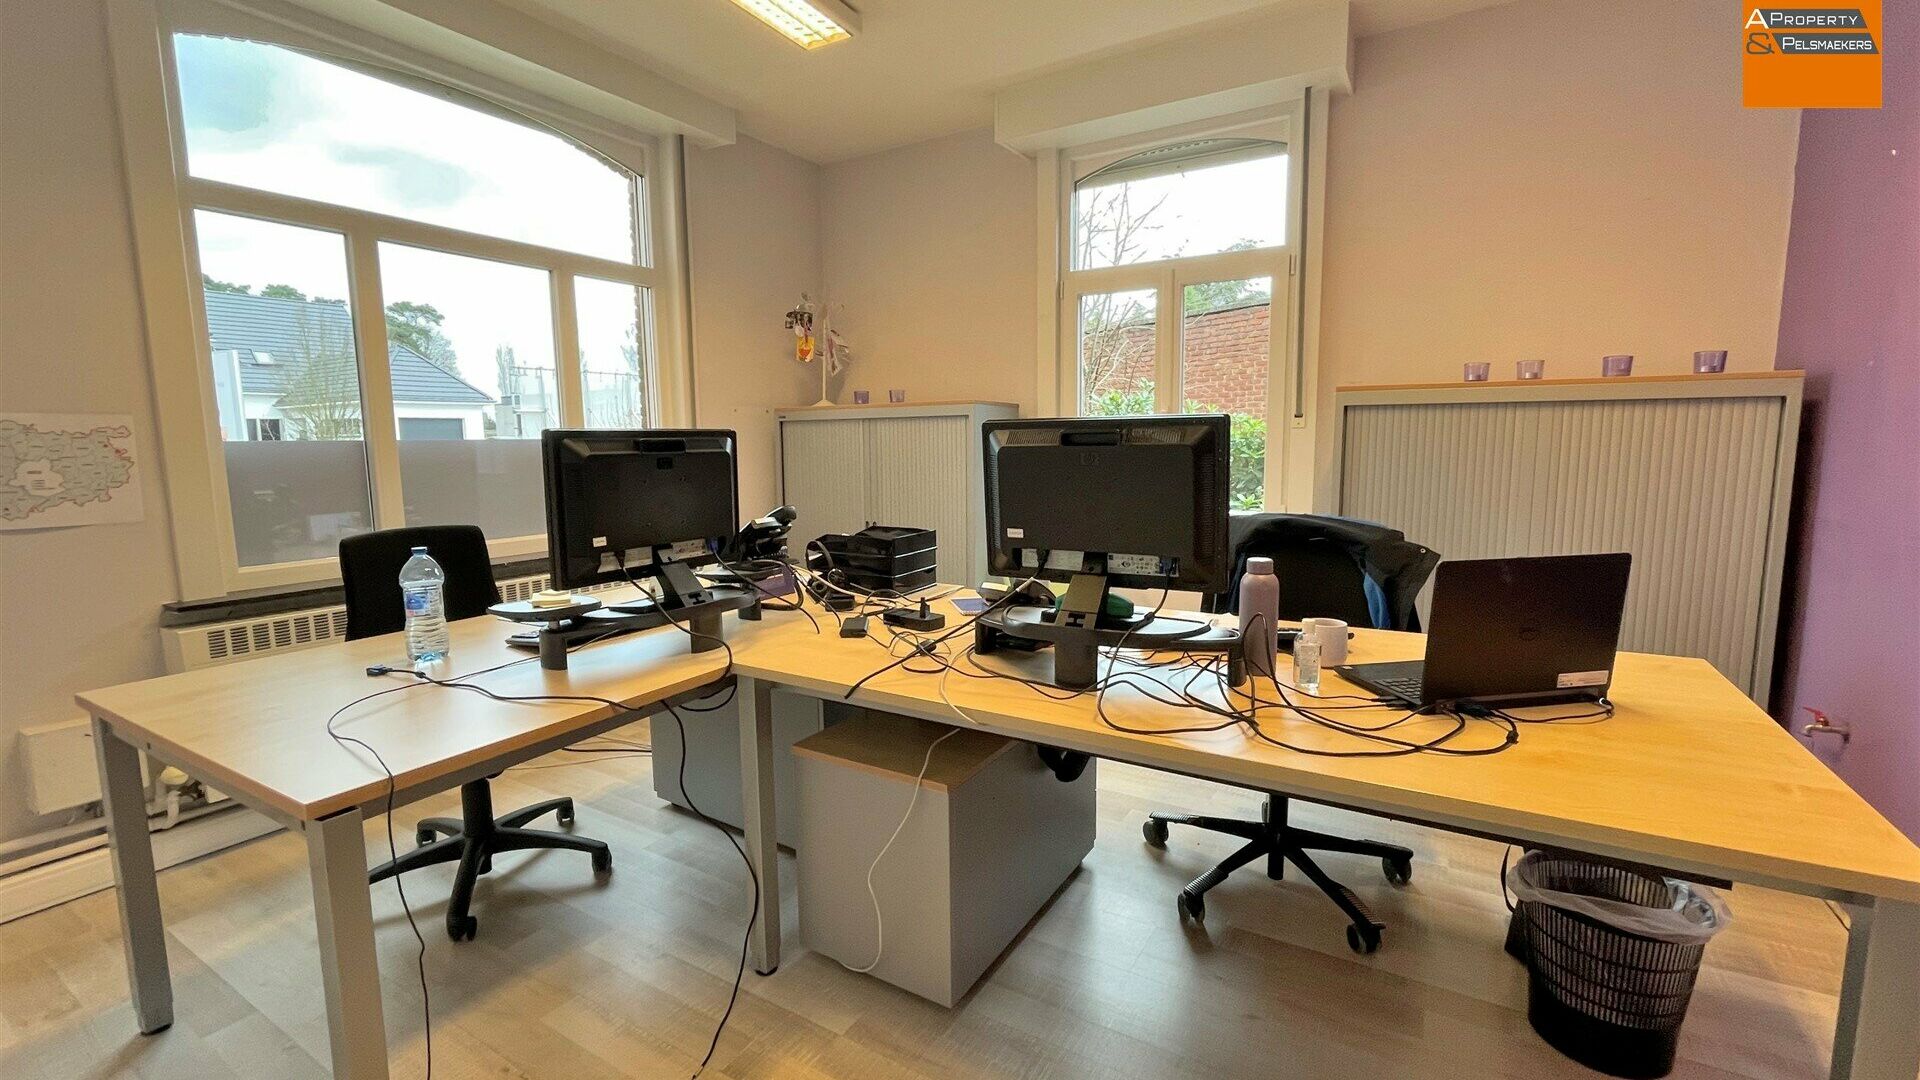 Offices for rent in Haacht